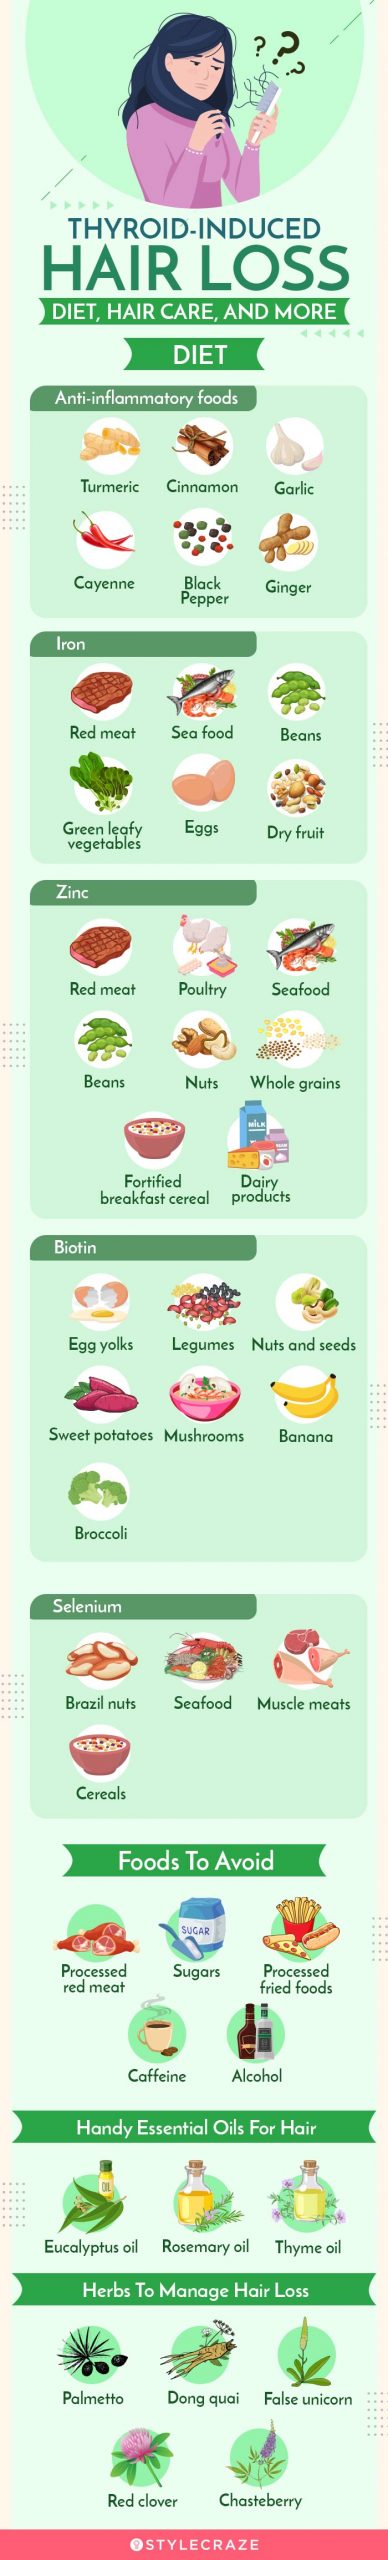 thyroid-induced hair loss diet (infographic)